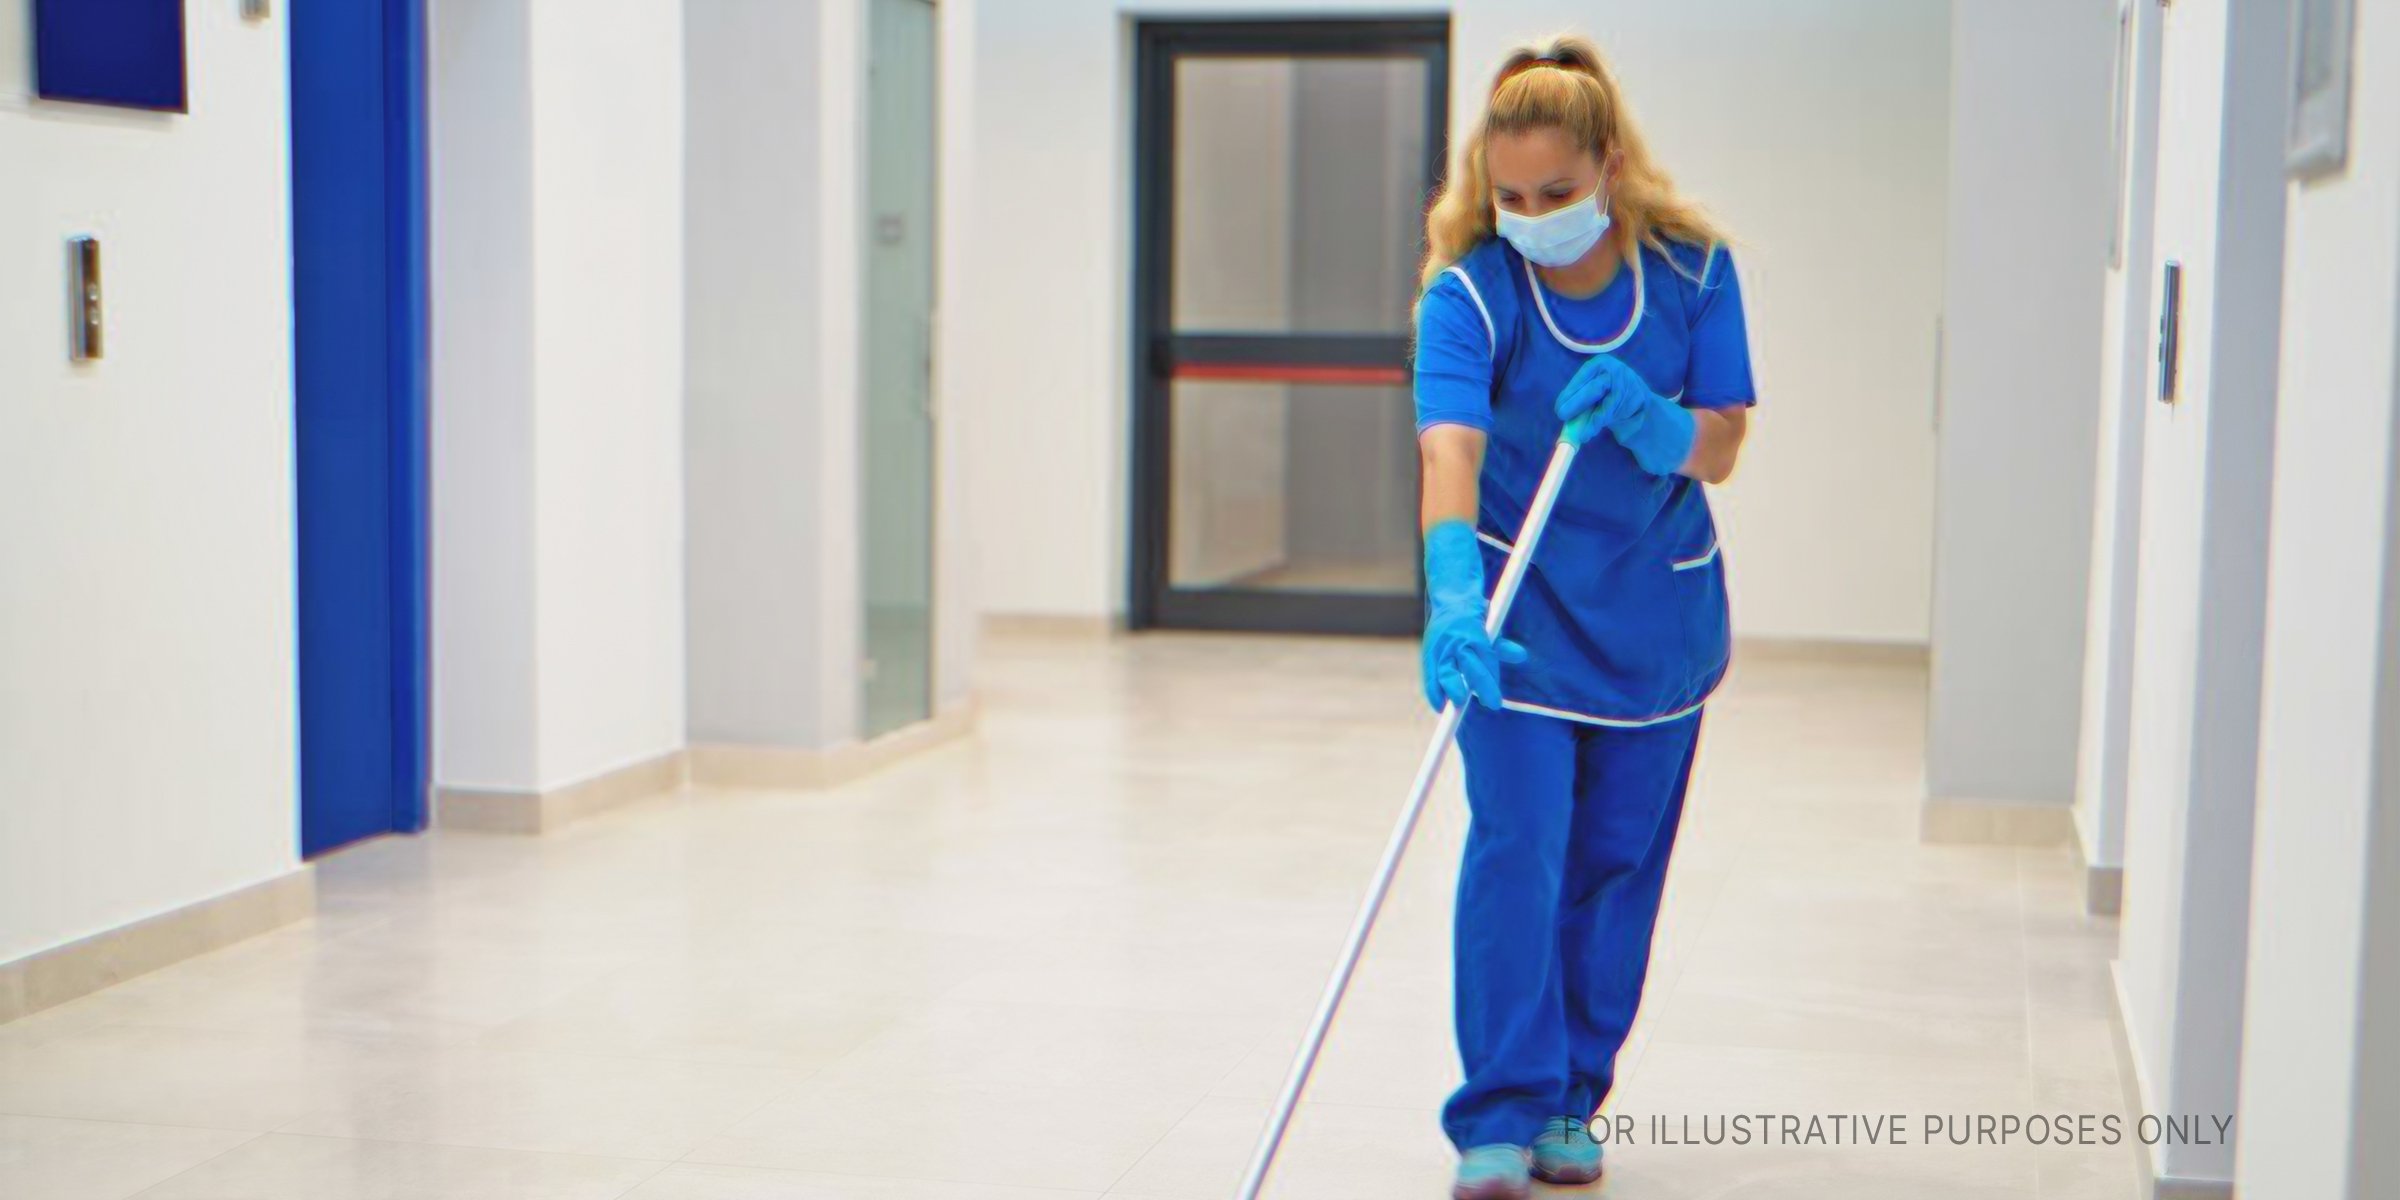 Cleaning lady. | Source: Shutterstock